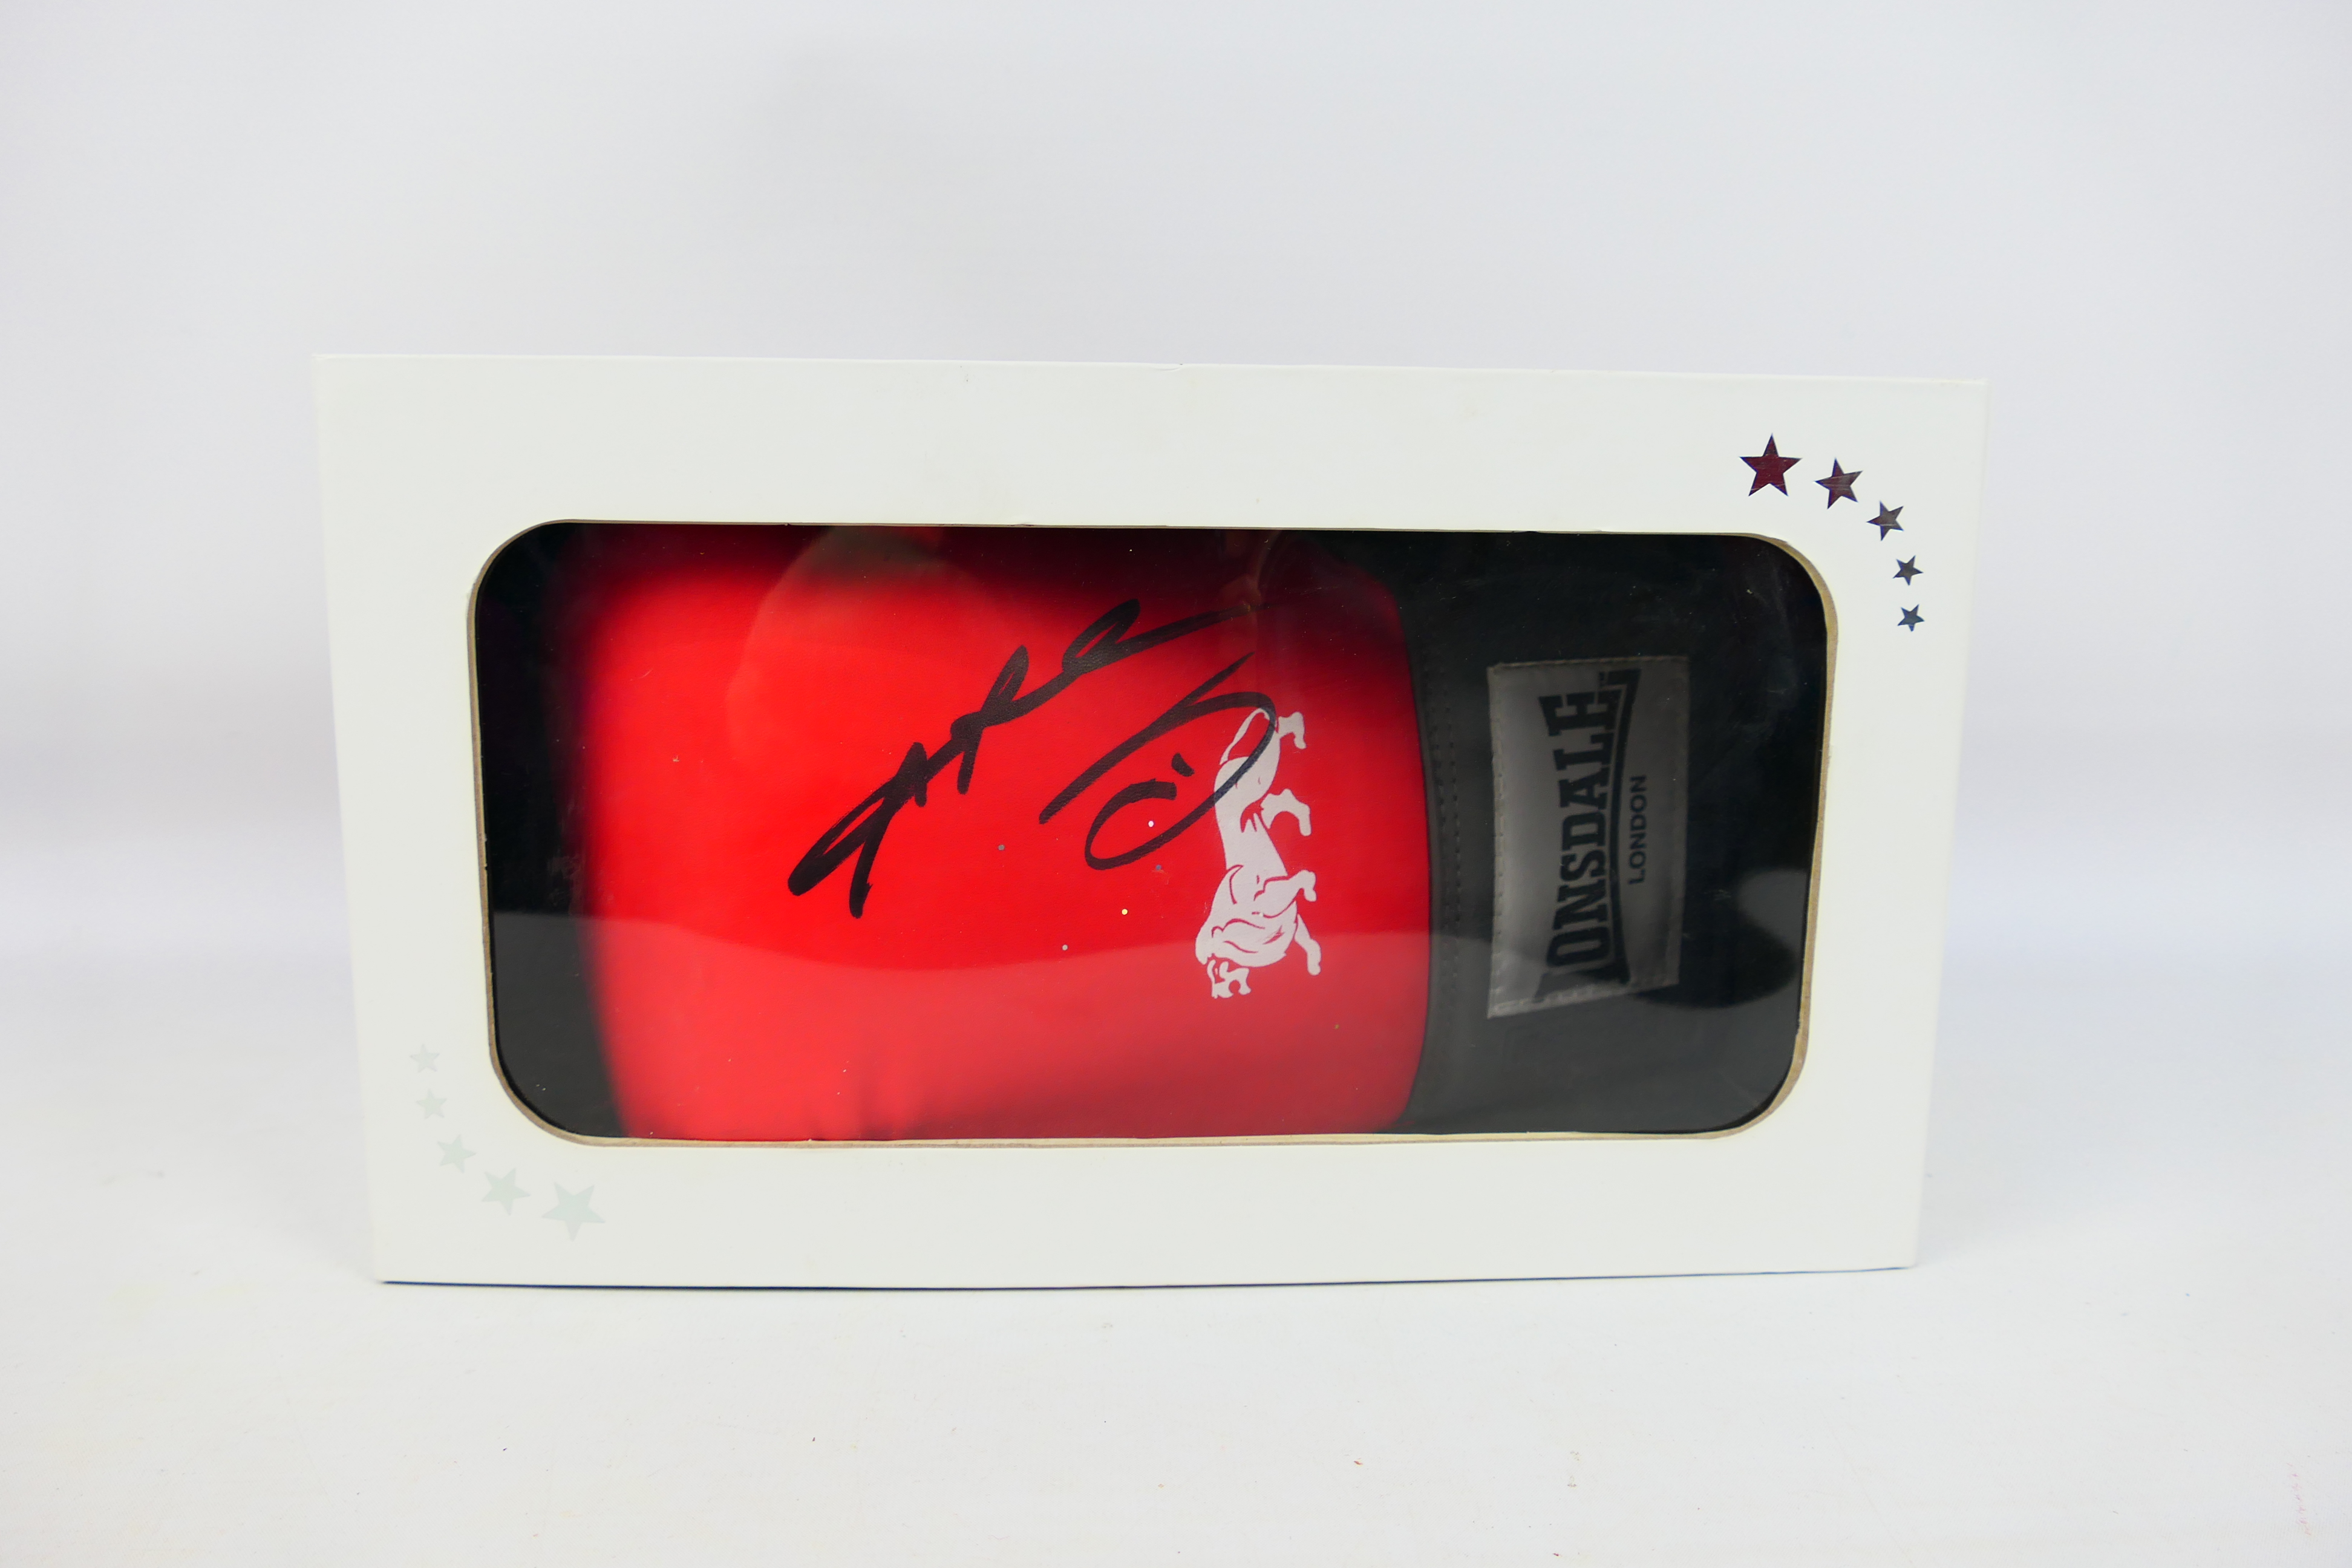 Boxing Interest - A red Lonsdale boxing glove signed by Sugar Ray Leonard (Ray Charles Leonard) - Image 4 of 5